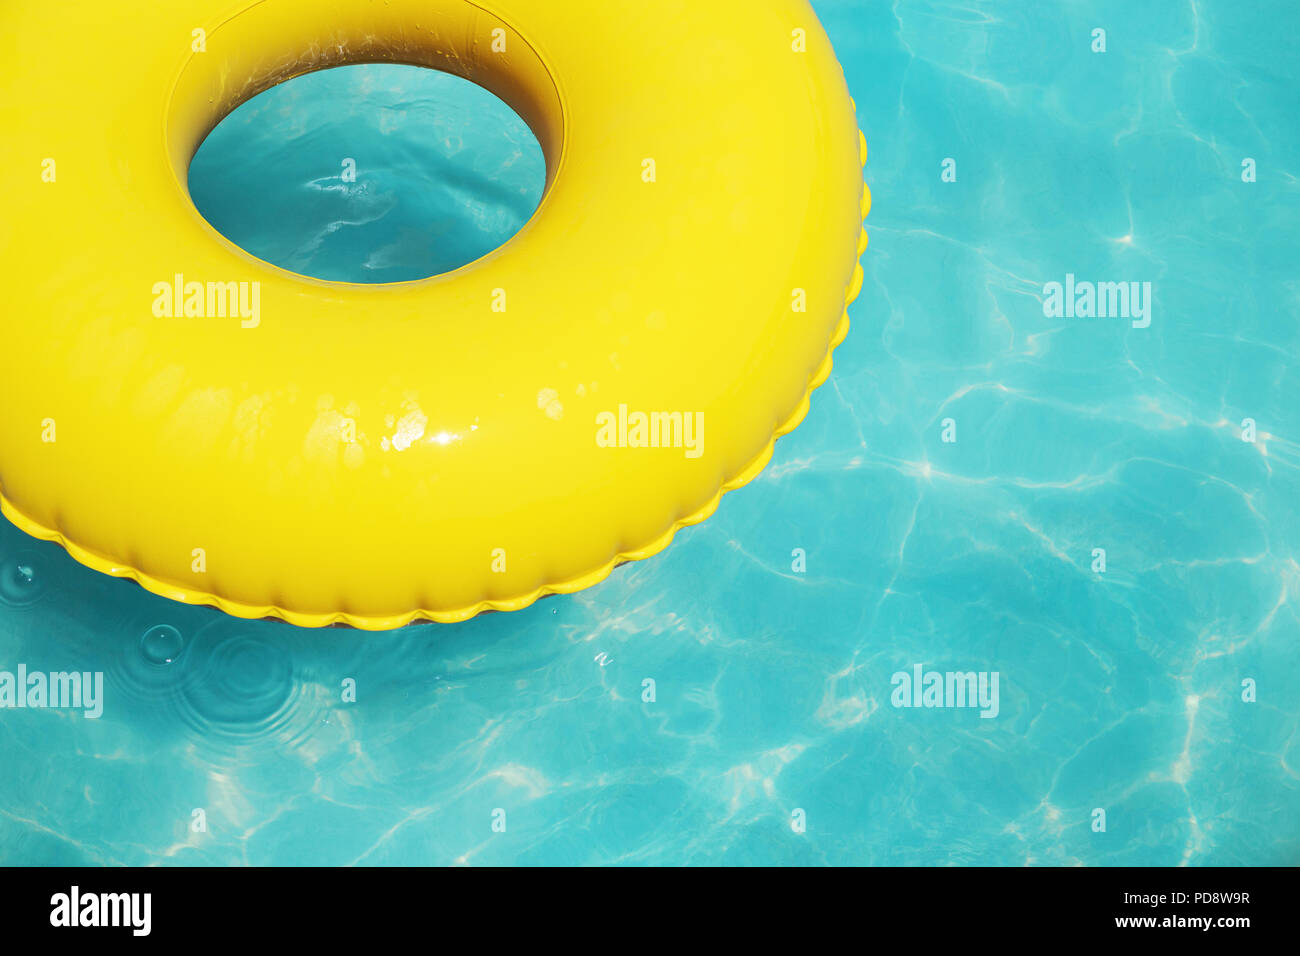 Yellow swimming ring on aqua blue water. Trendy colors, abstract summer background with copy space. Vacation, minimal. Stock Photo